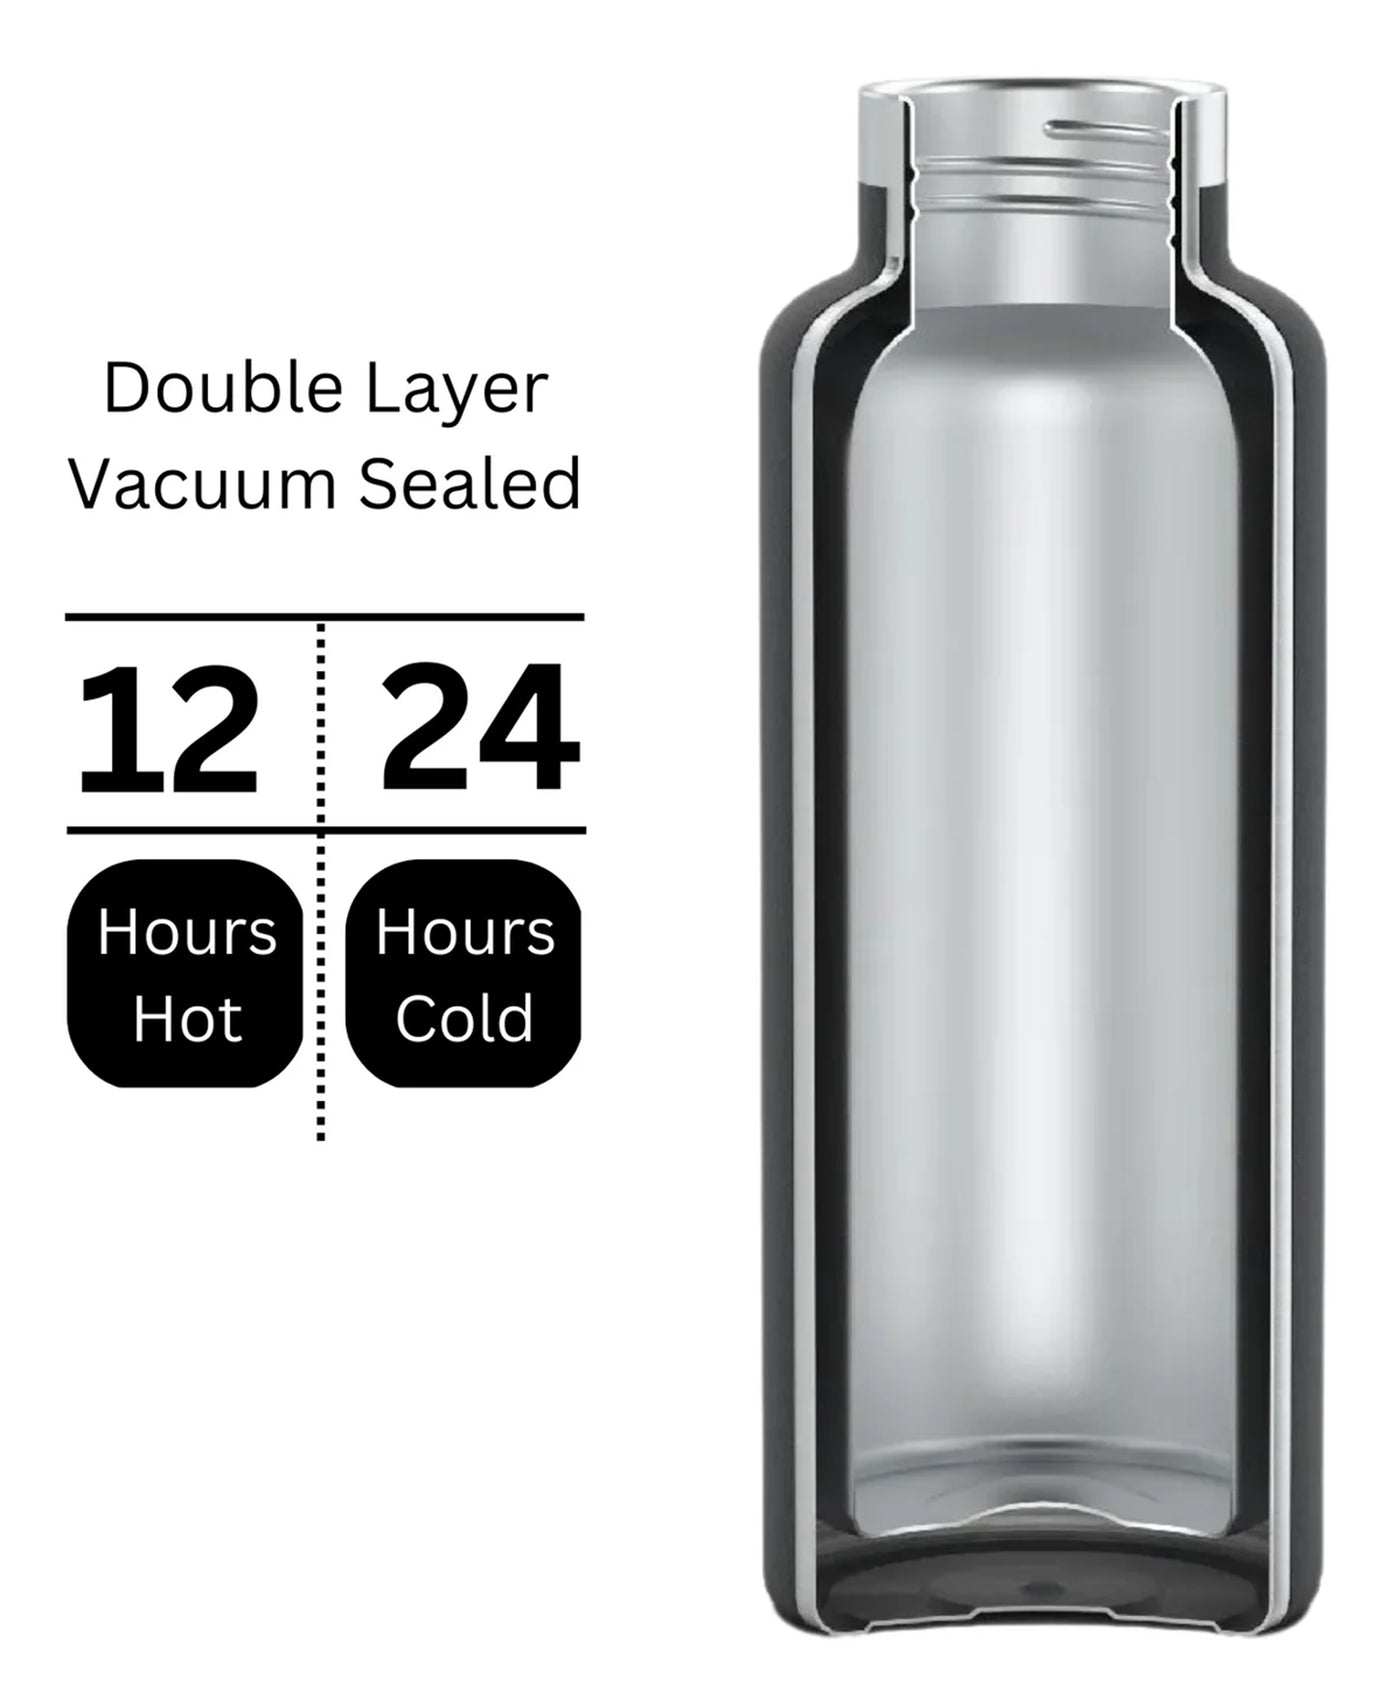 Wu Vacuum Insulated Bottle with Built-In Bluetooth Speaker